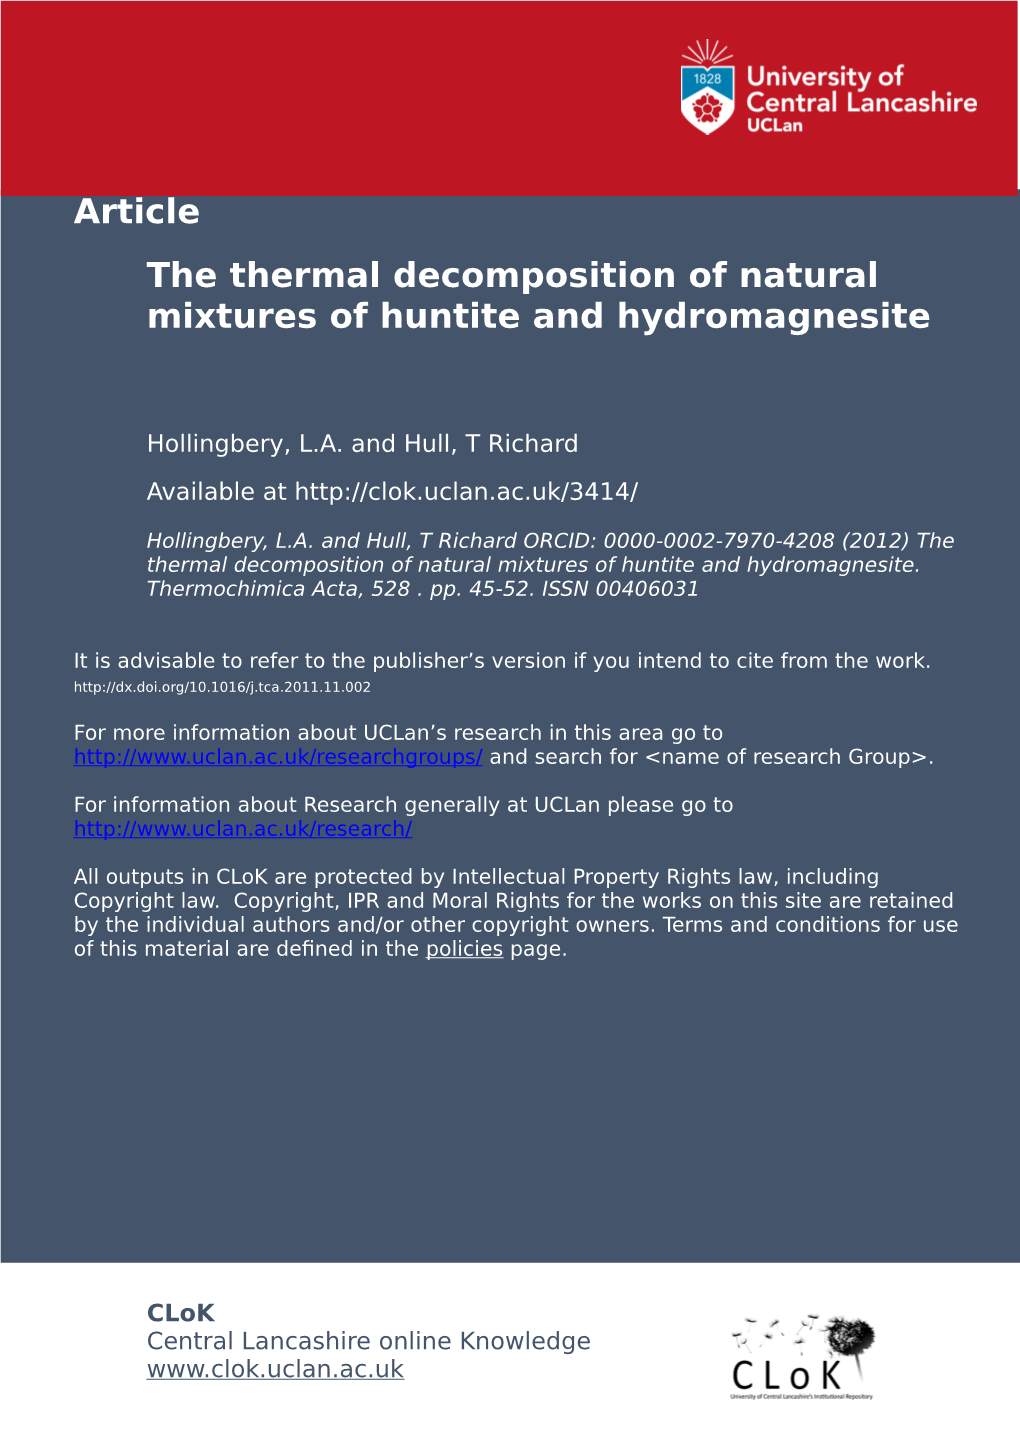 The Thermal Decomposition of Natural Mixtures of Huntite and Hydromagnesite